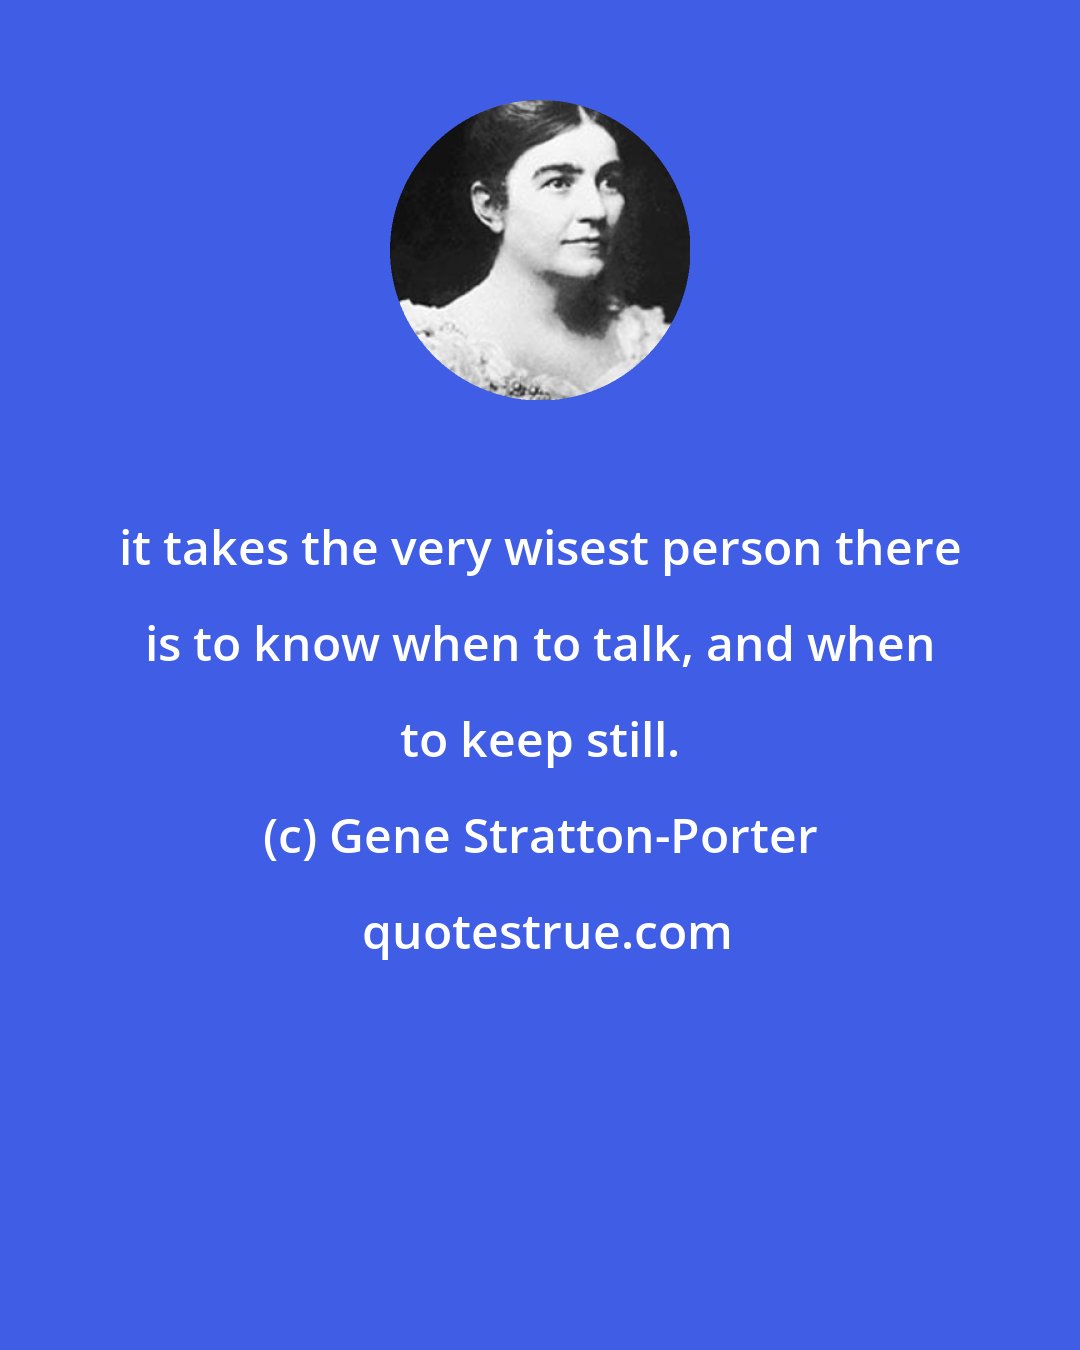 Gene Stratton-Porter: it takes the very wisest person there is to know when to talk, and when to keep still.